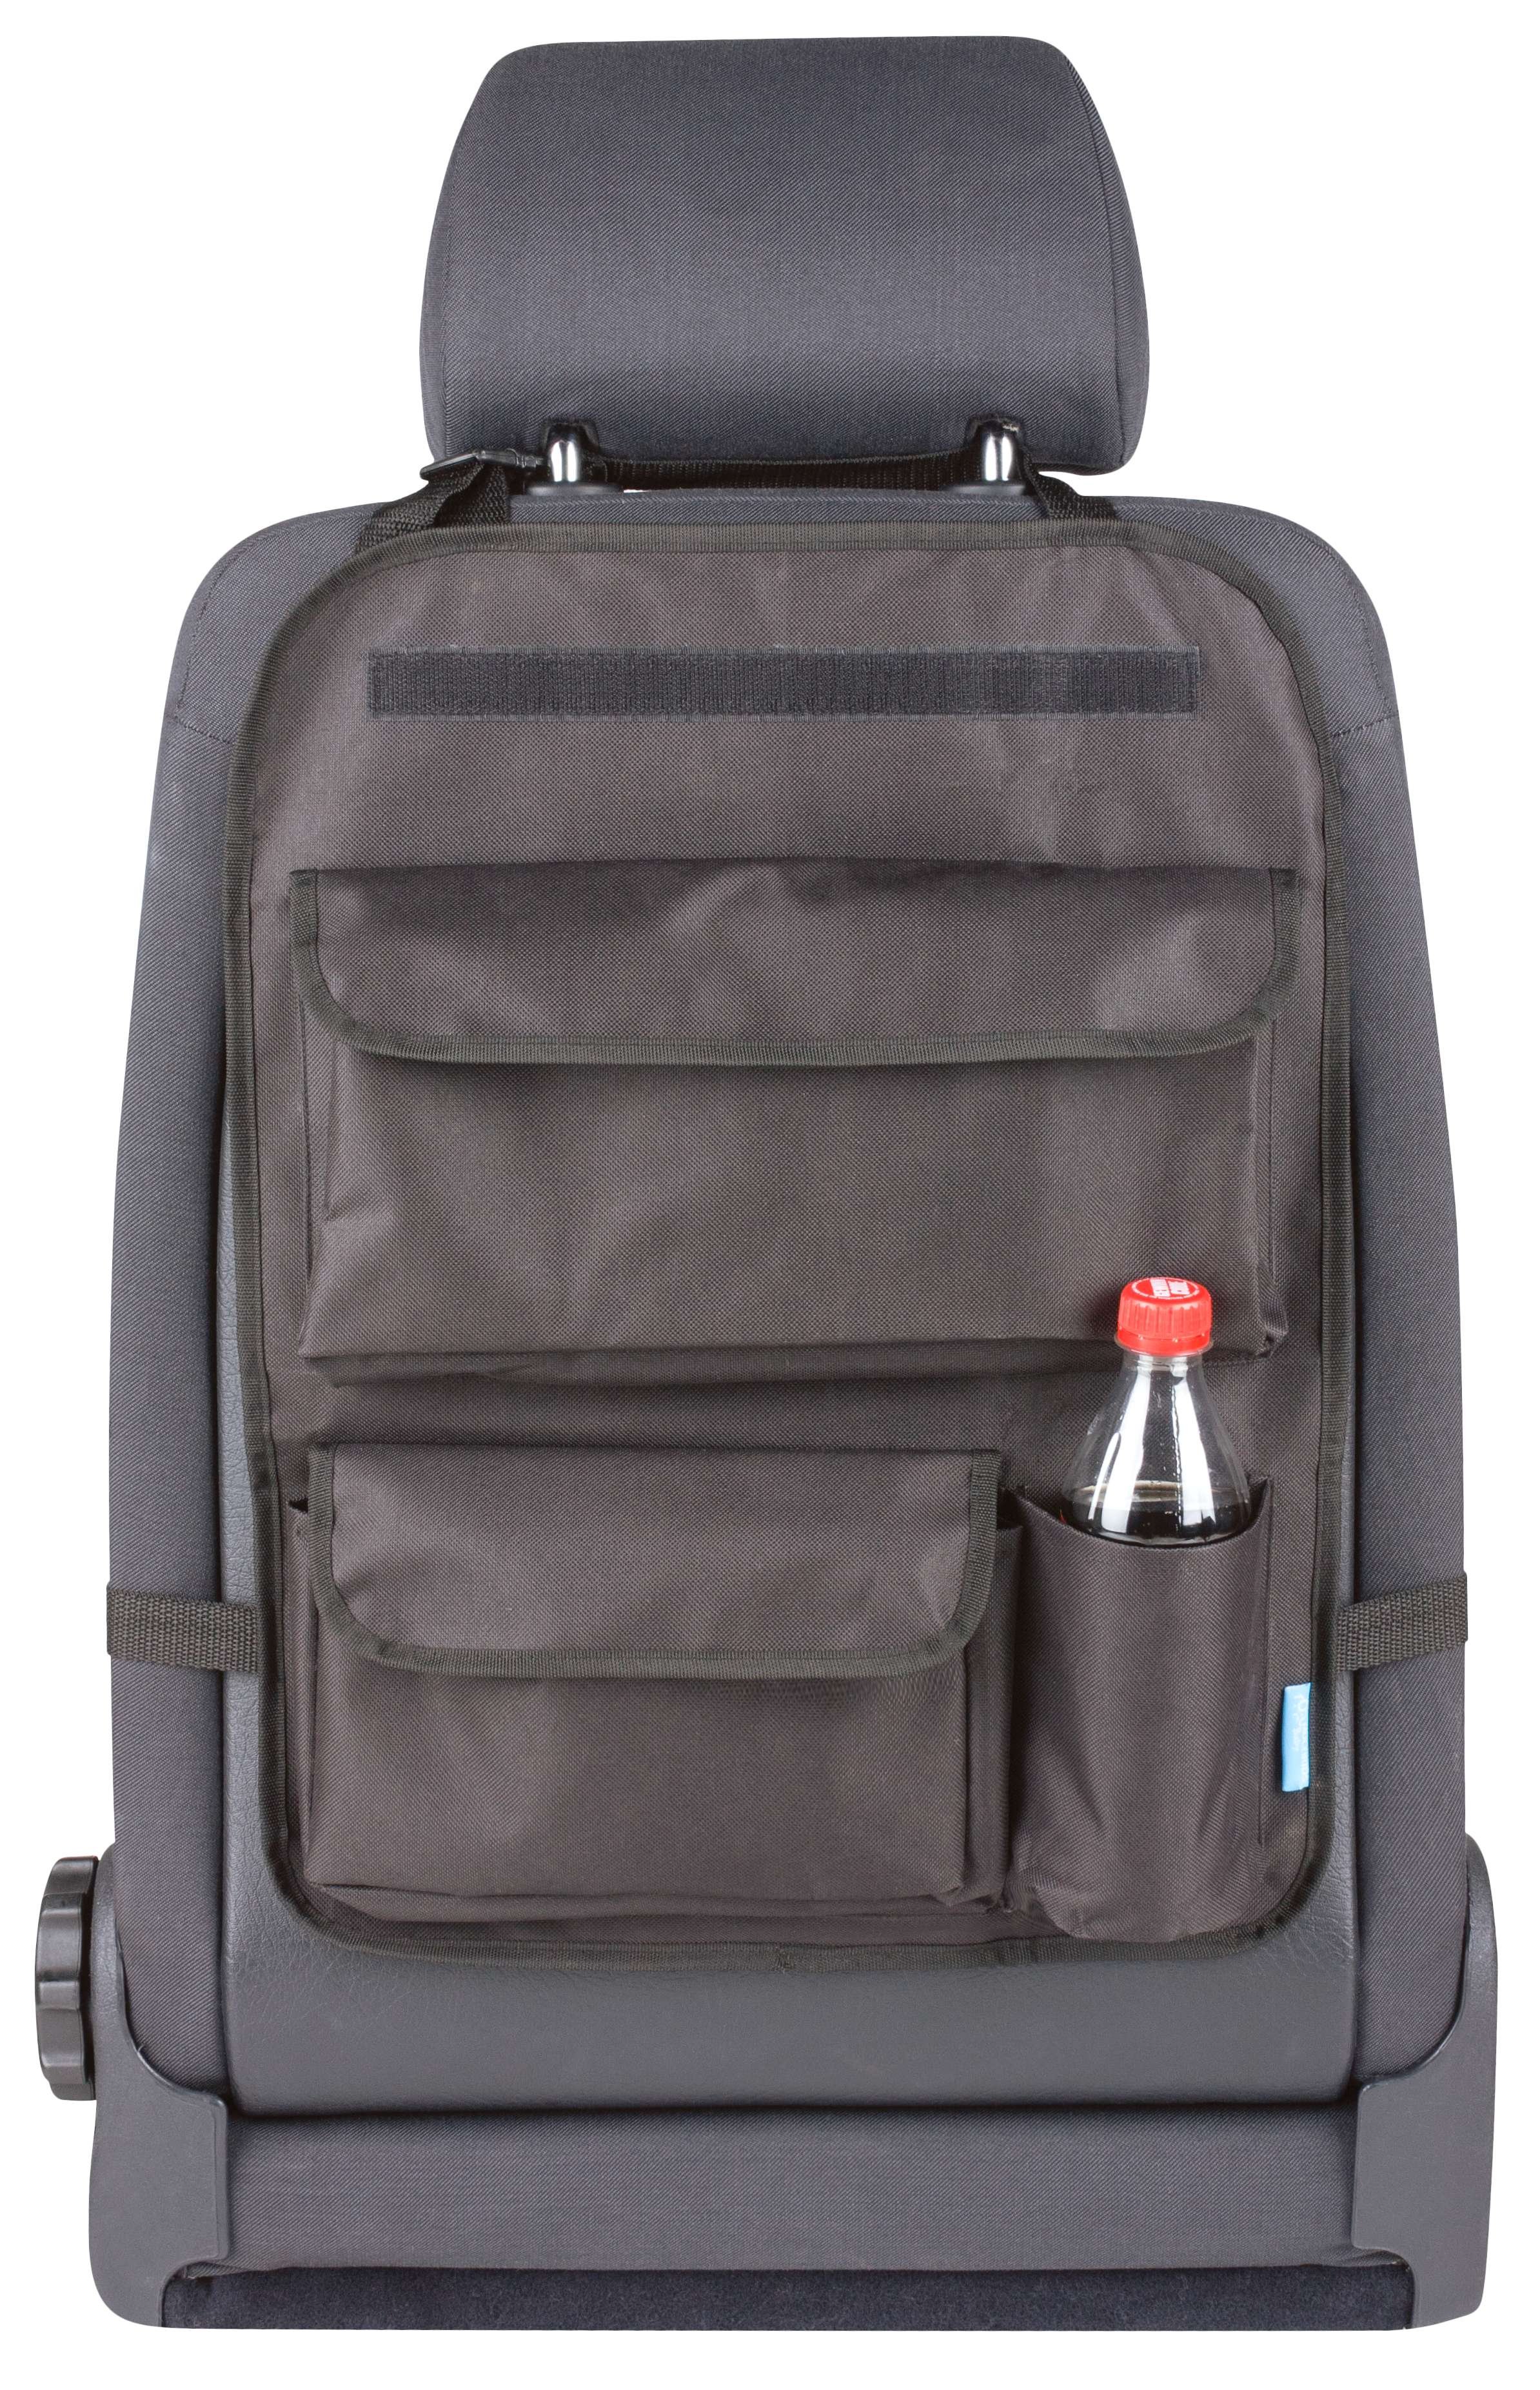 Back seat bag Maxi with removable tray holder black